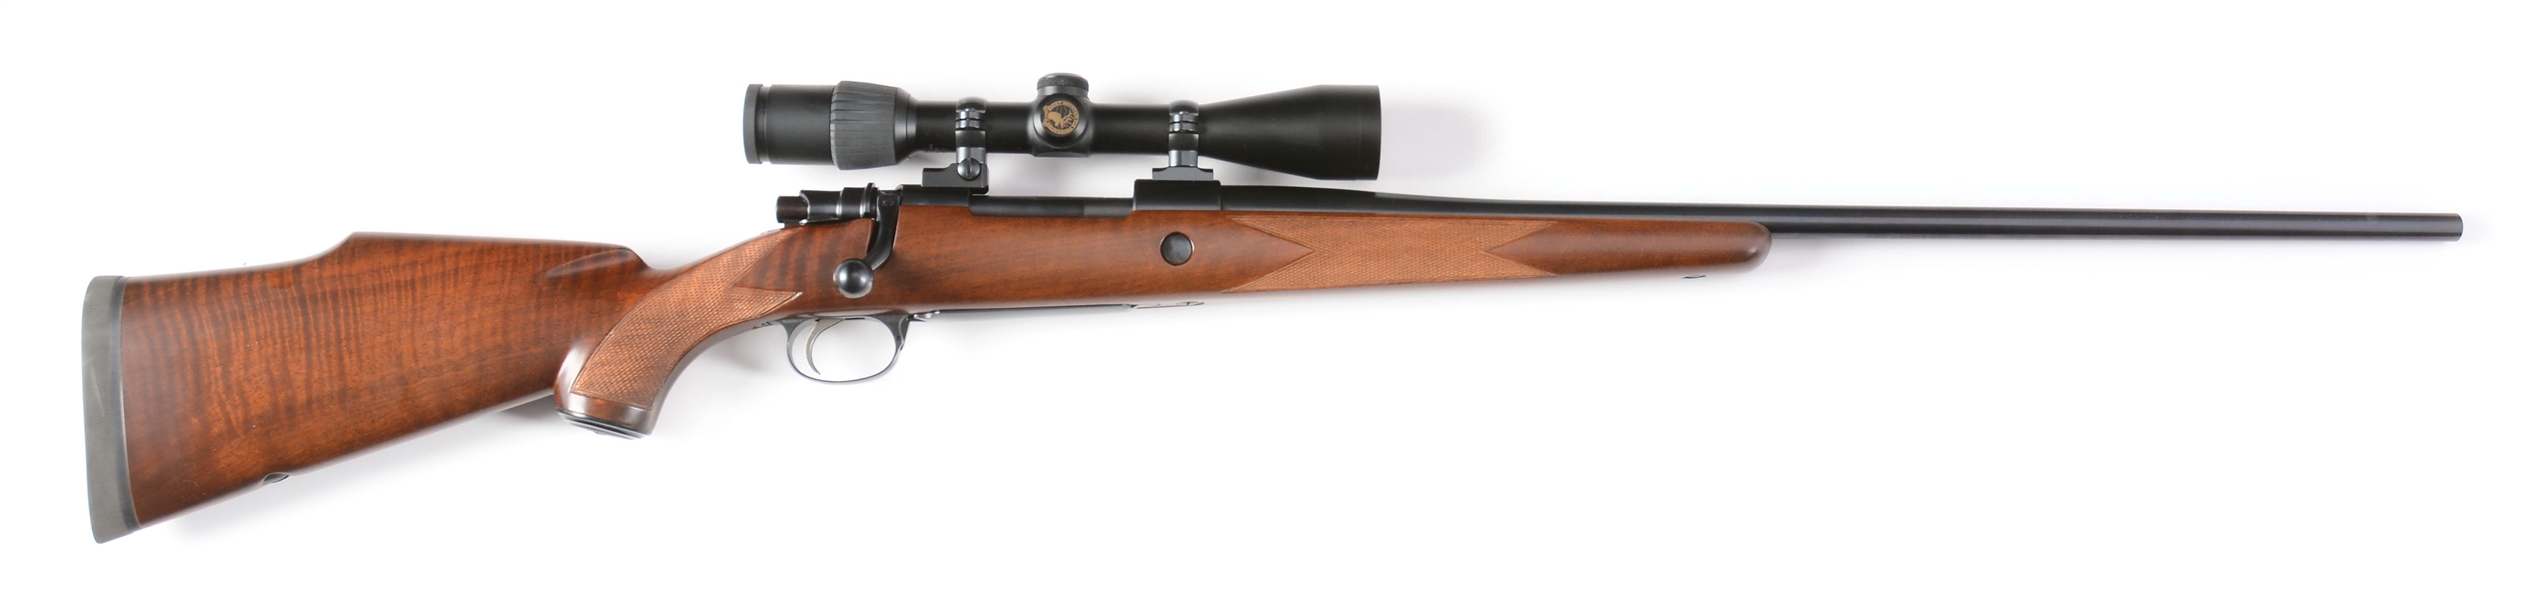 (M) FN ACTION COMMERCIAL MAUSER SPORTER BOLT ACTION RIFLE.